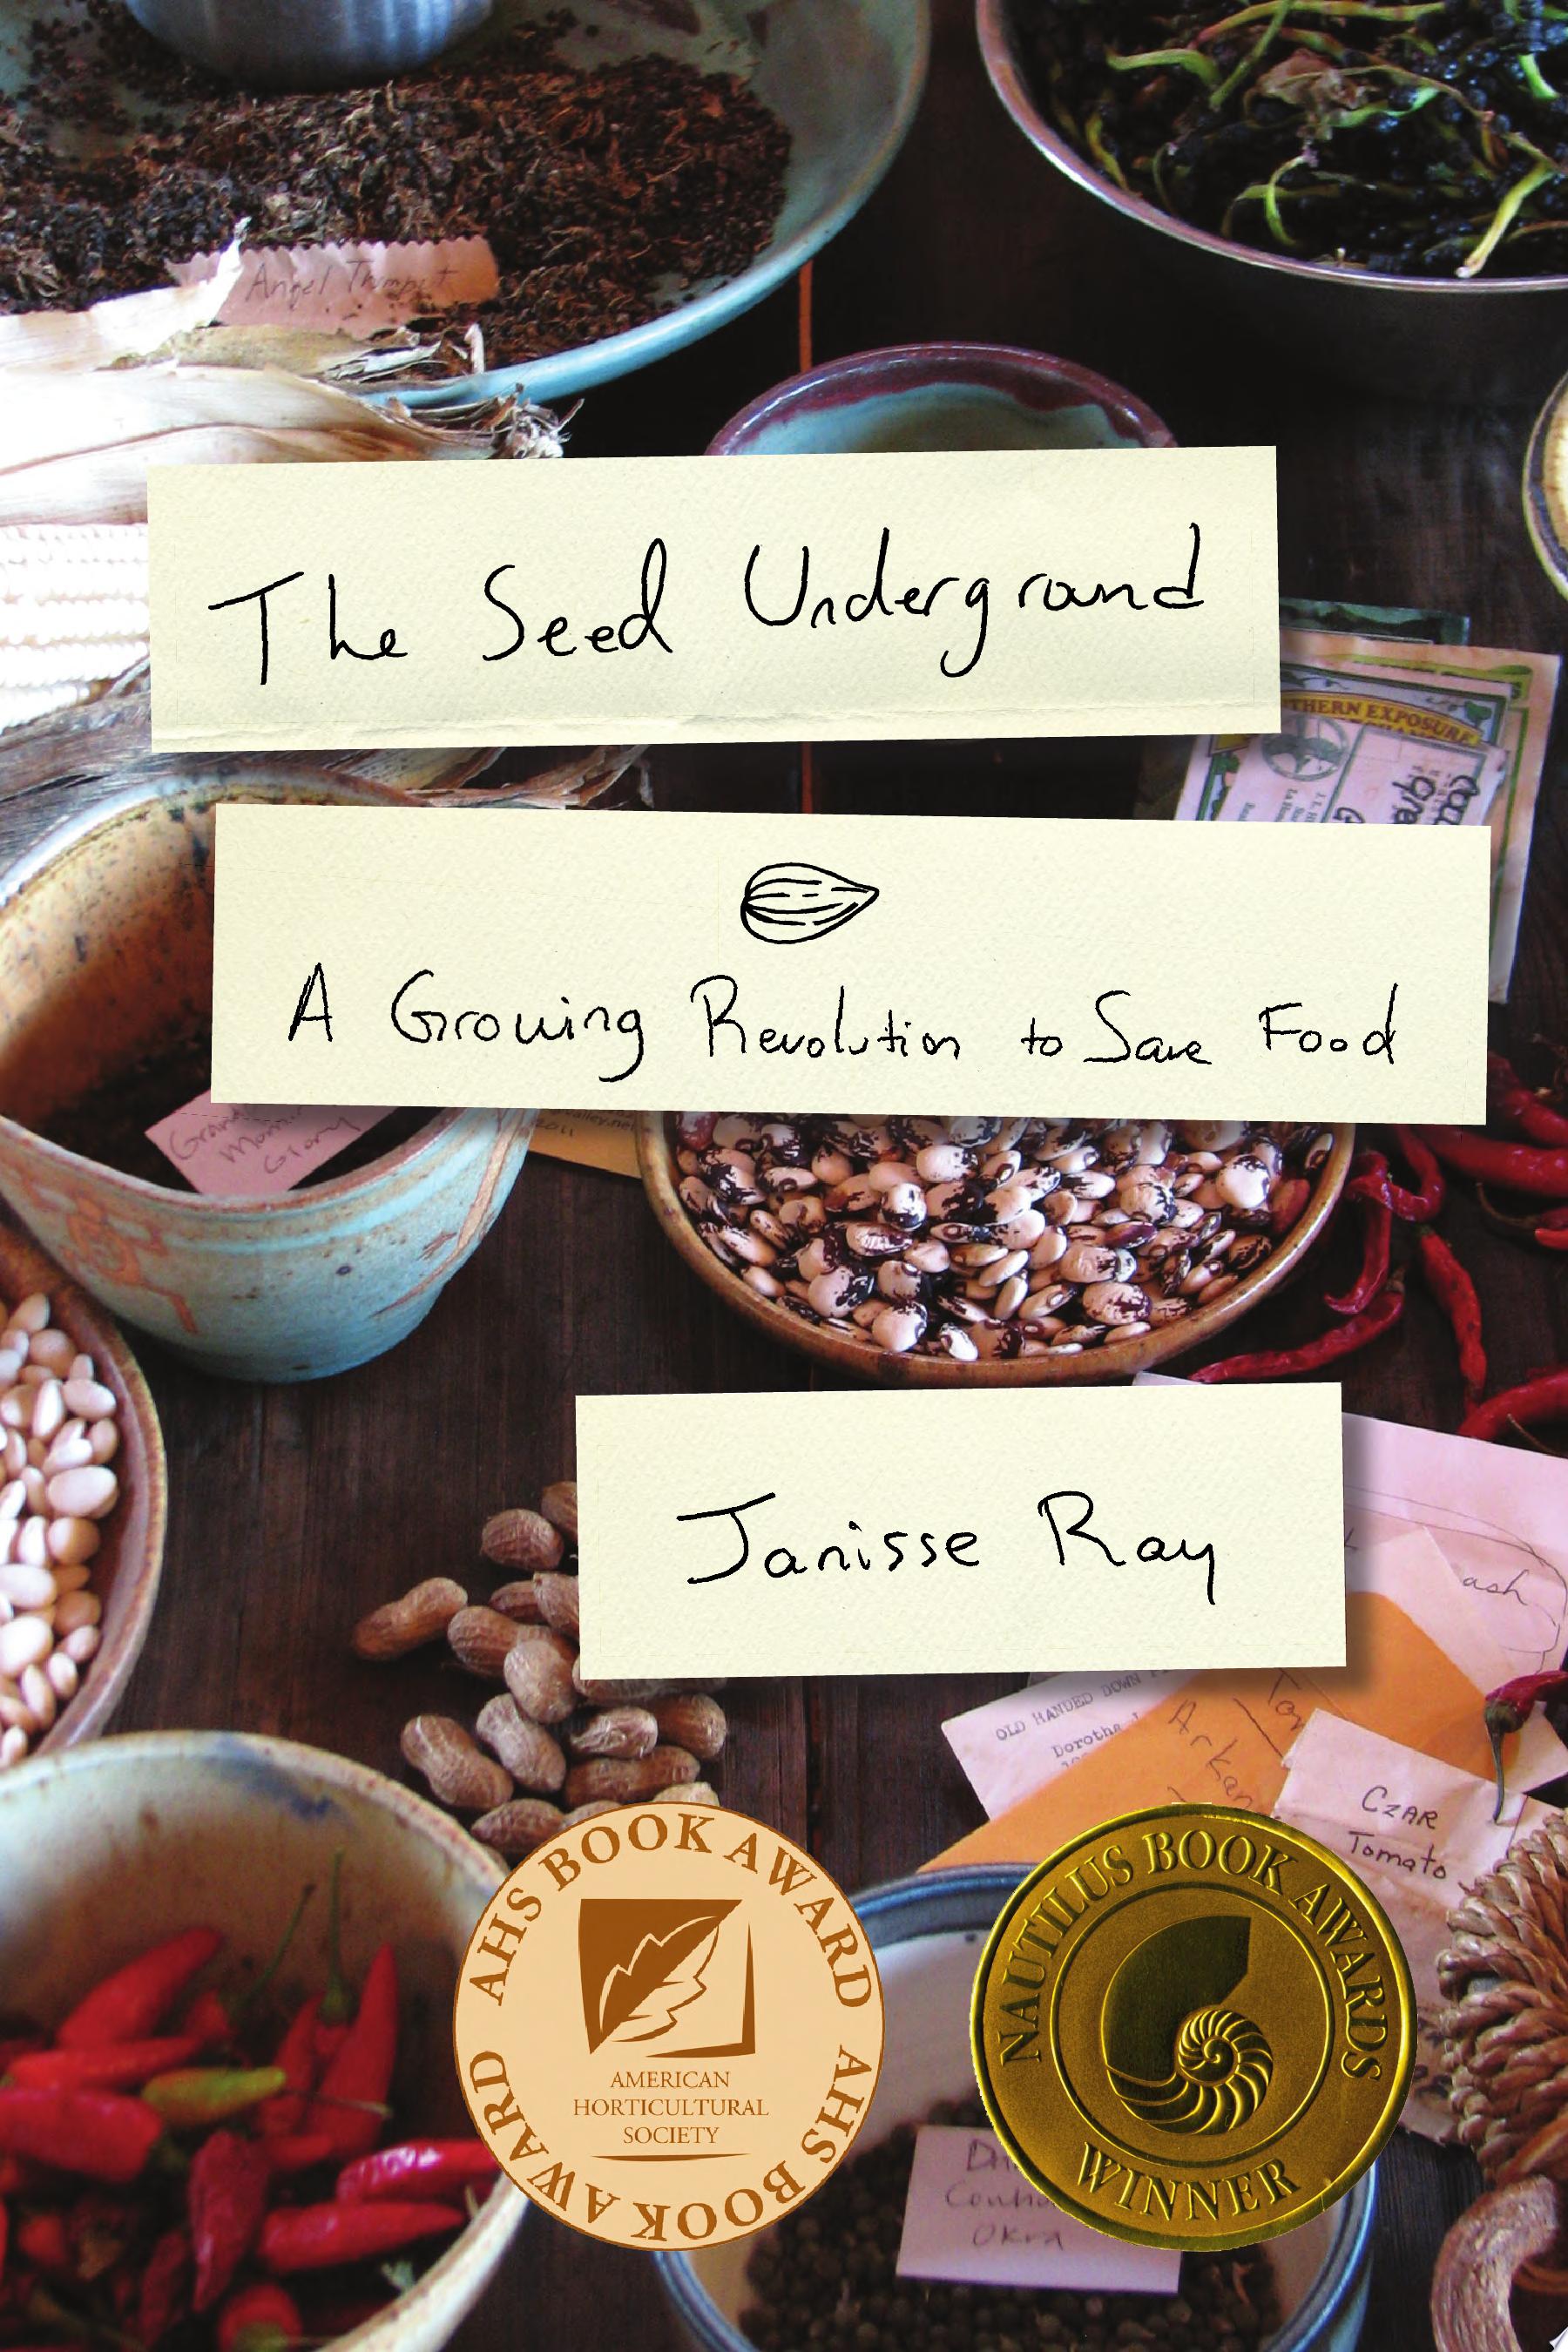 Image for "The Seed Underground"